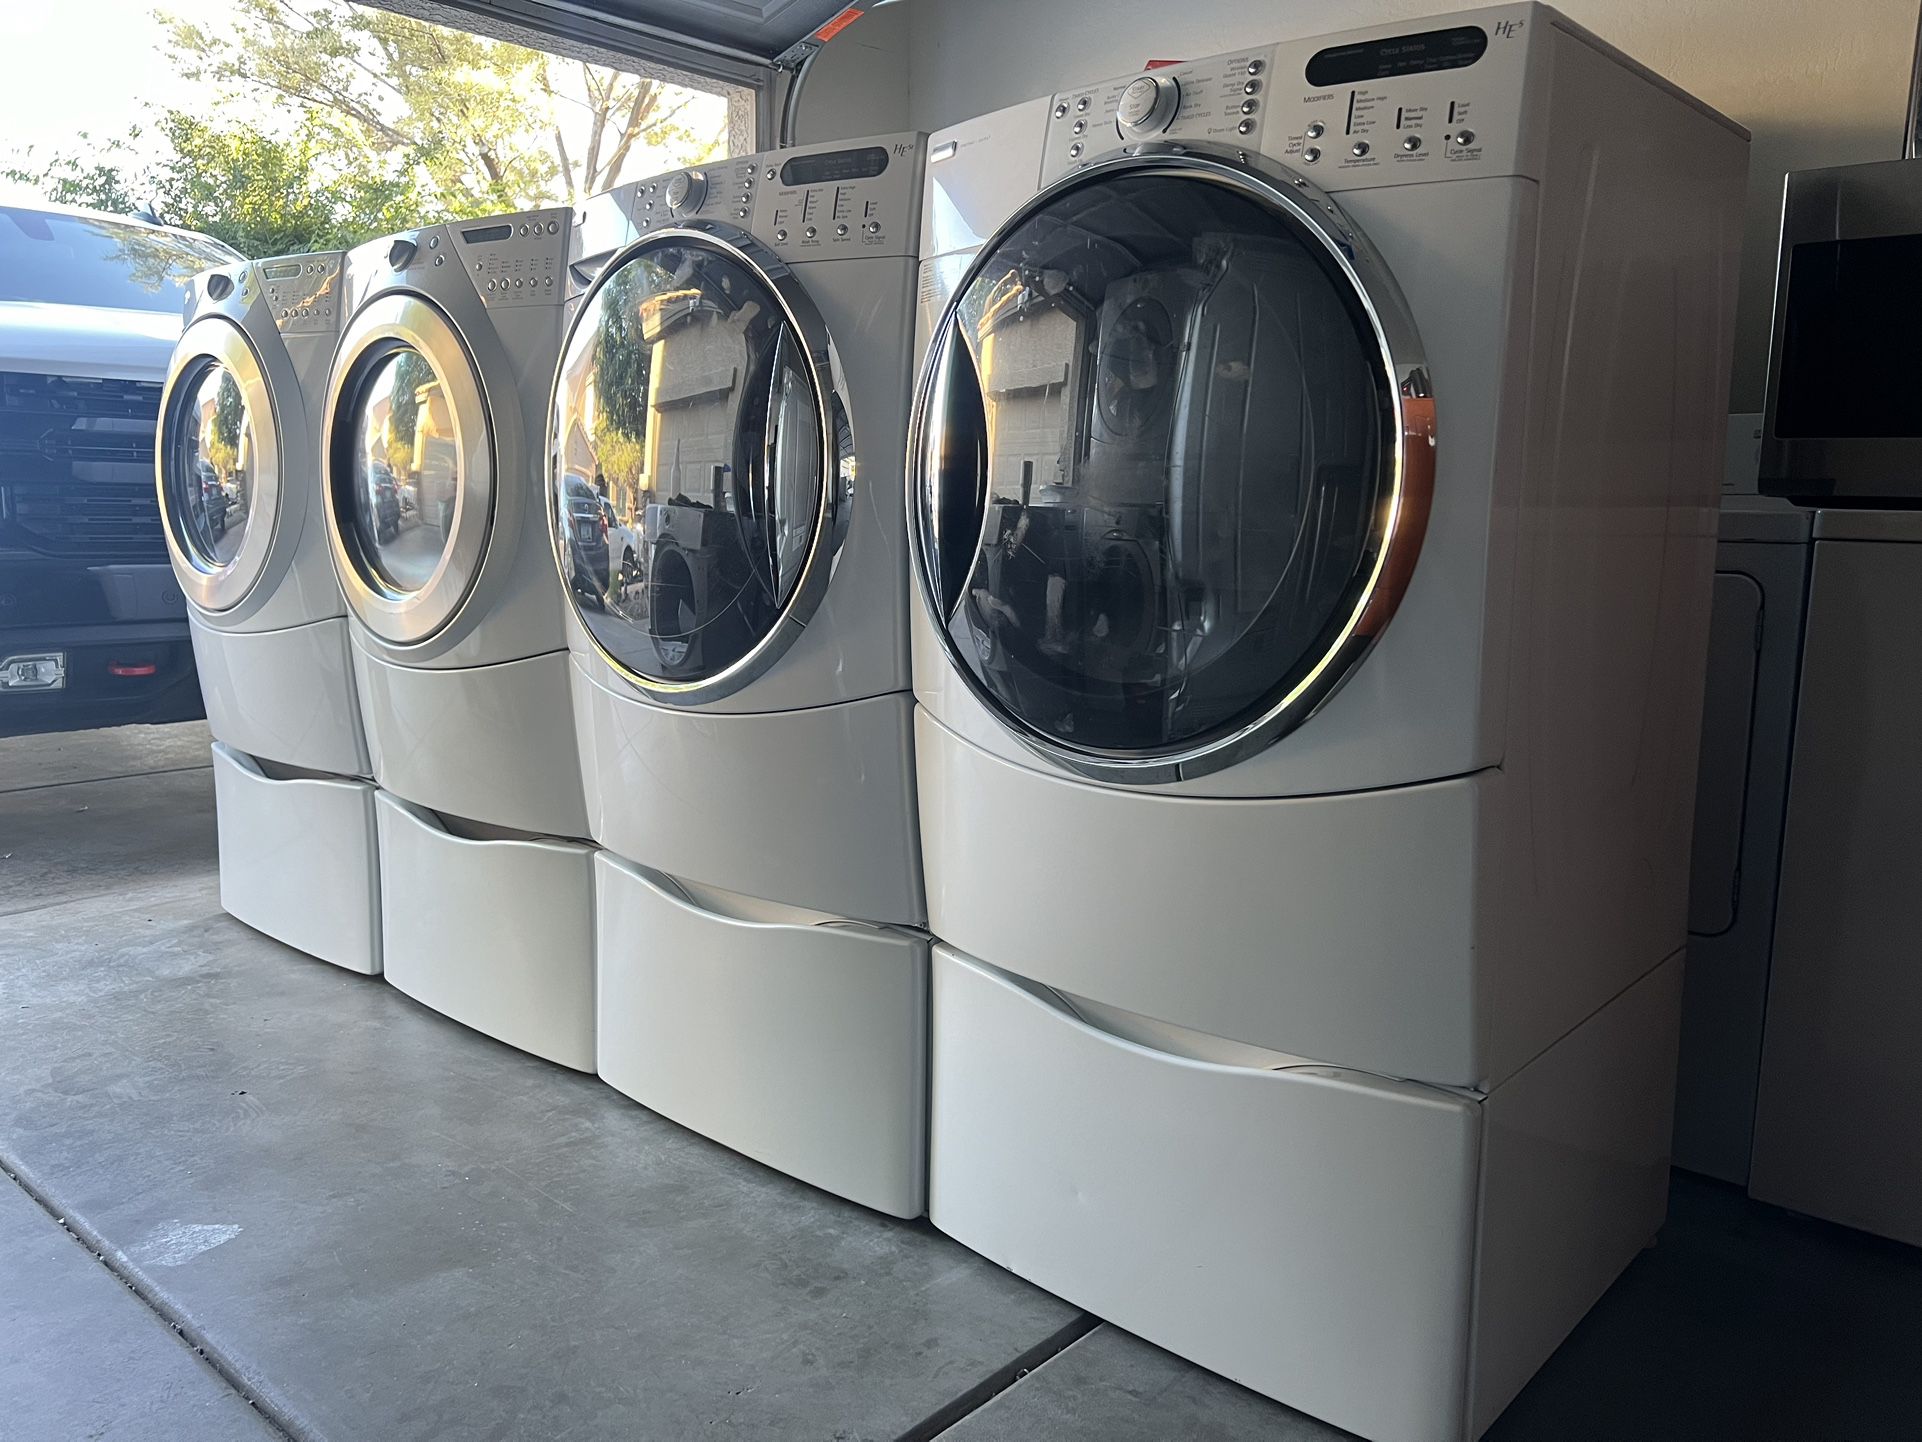 KENMORE LARGE CAPACITY FRONT LOAD WASHER AND DRYER WORKING GREAT WITH WARRANTY!